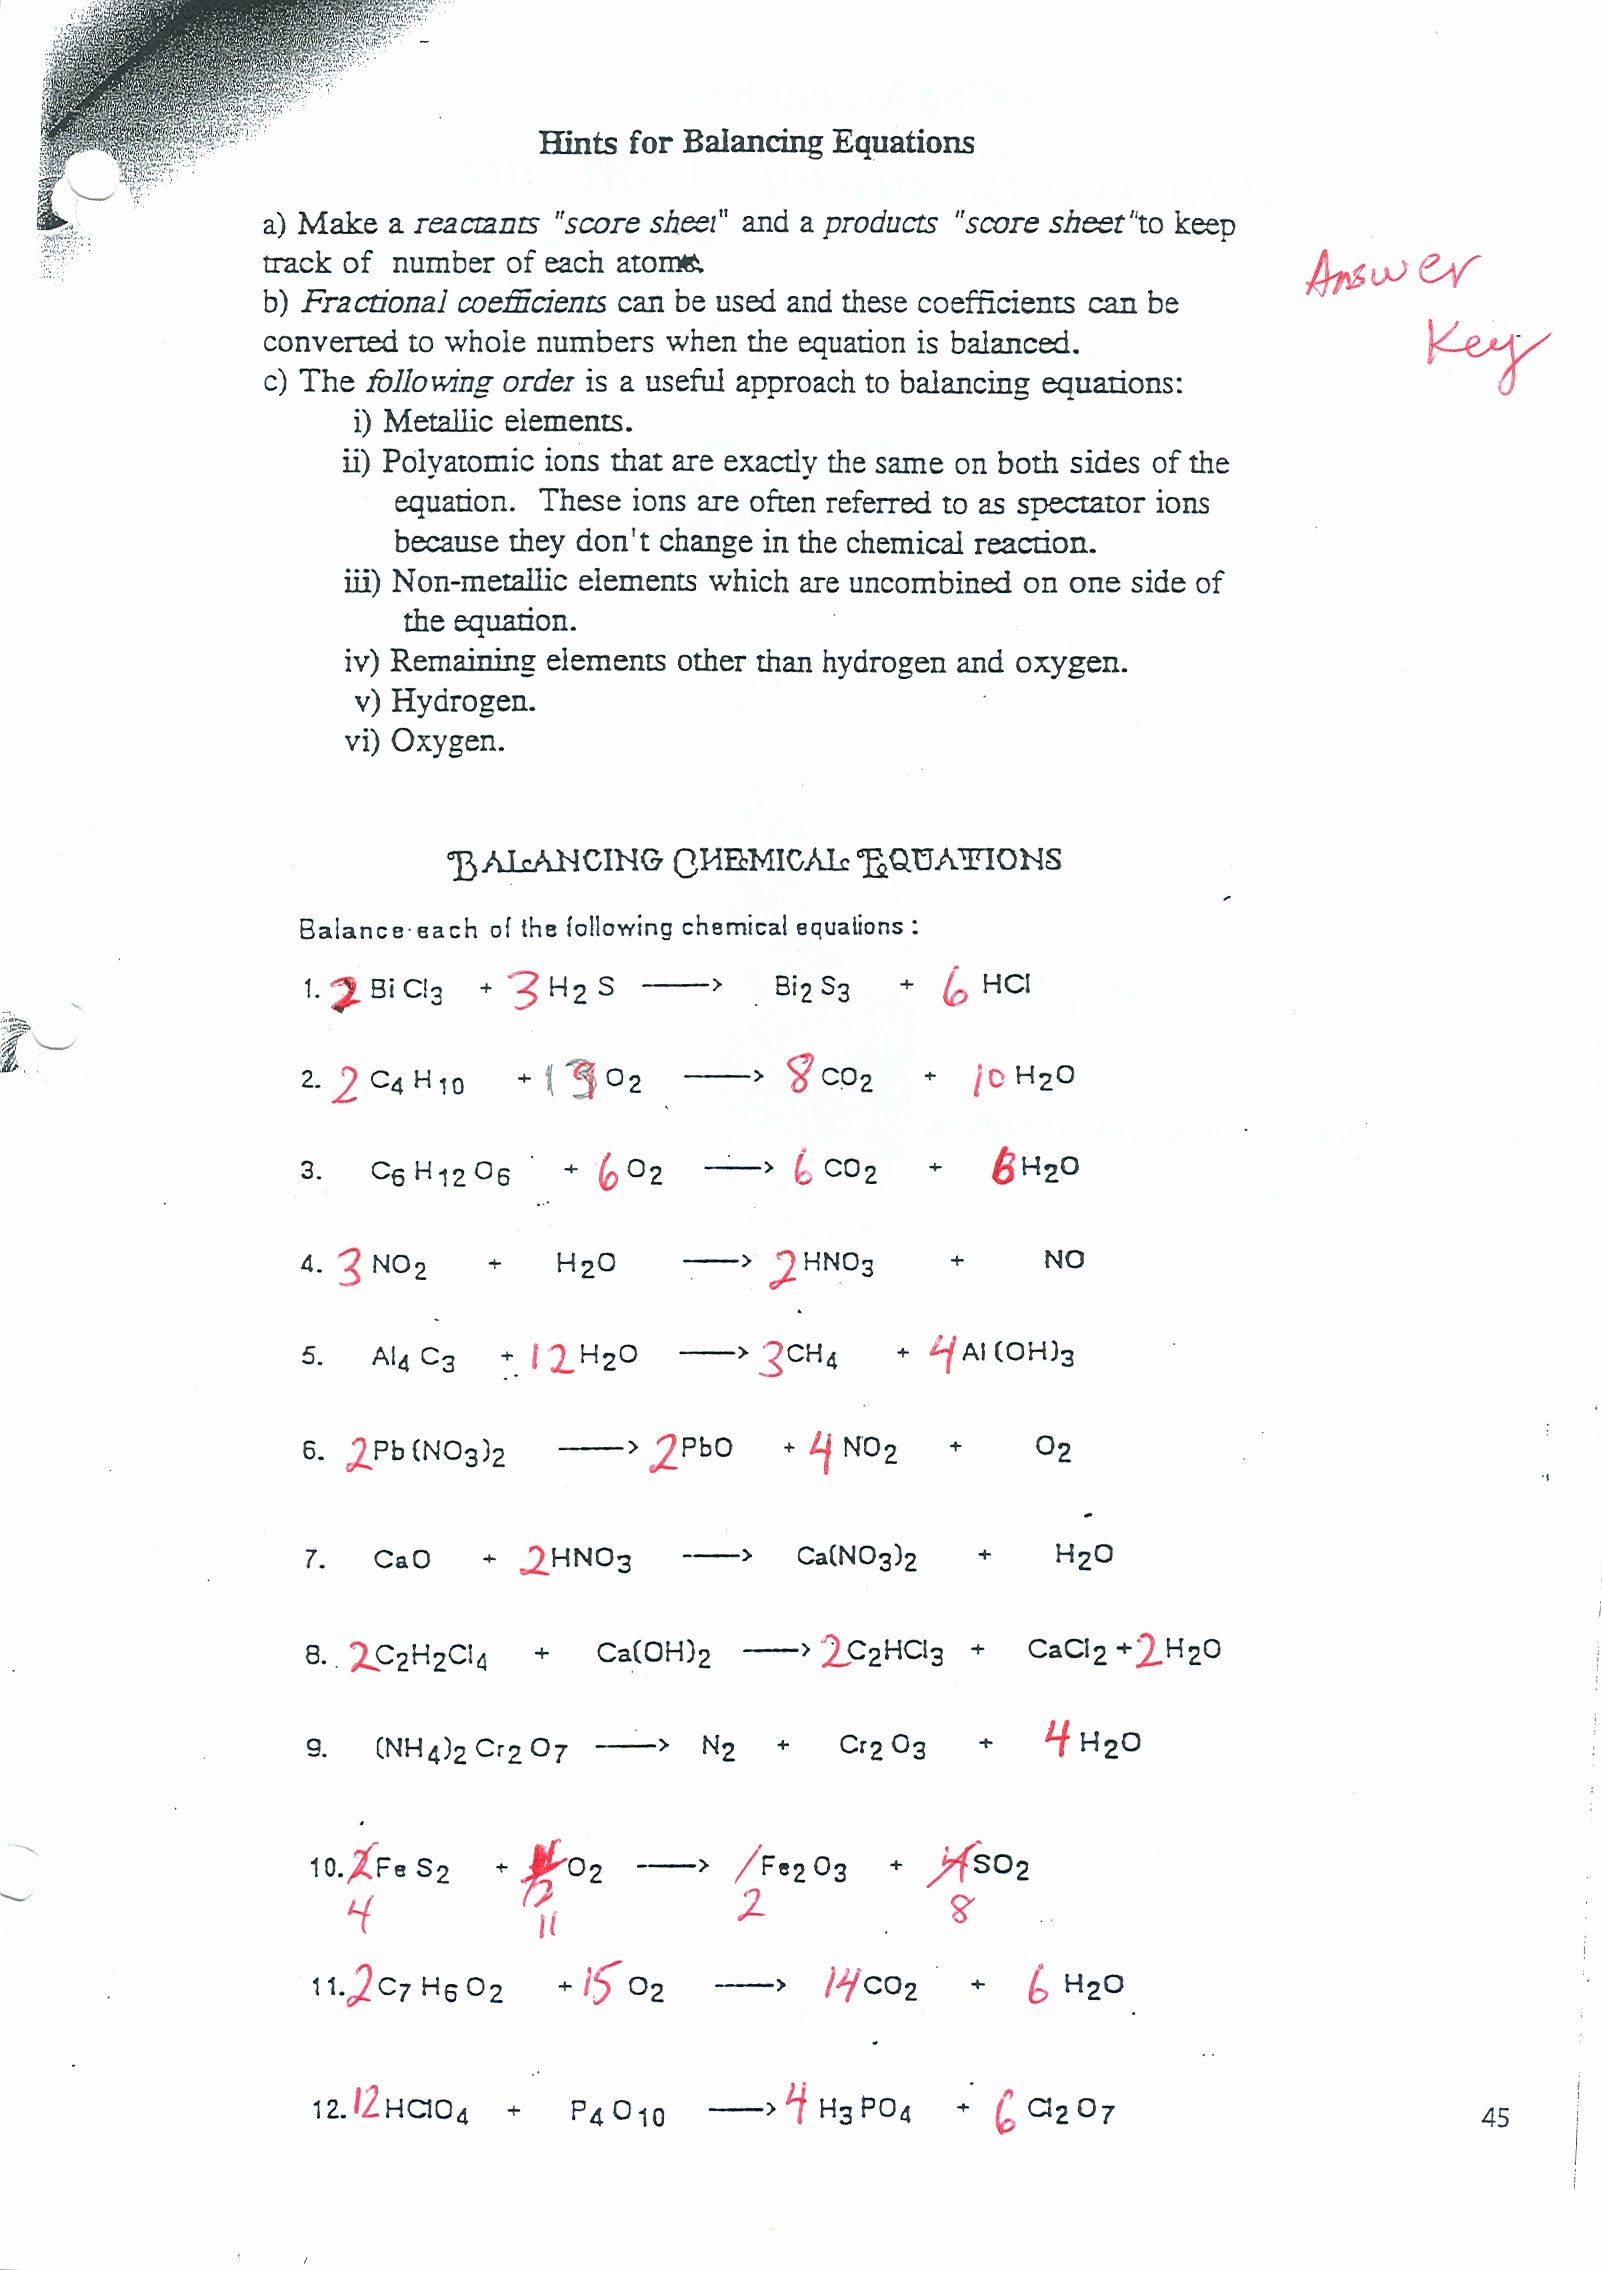 Balancing Chemical Equations Worksheet Answers Inspirational Balancing Equations Worksheet Health and Fitness Training